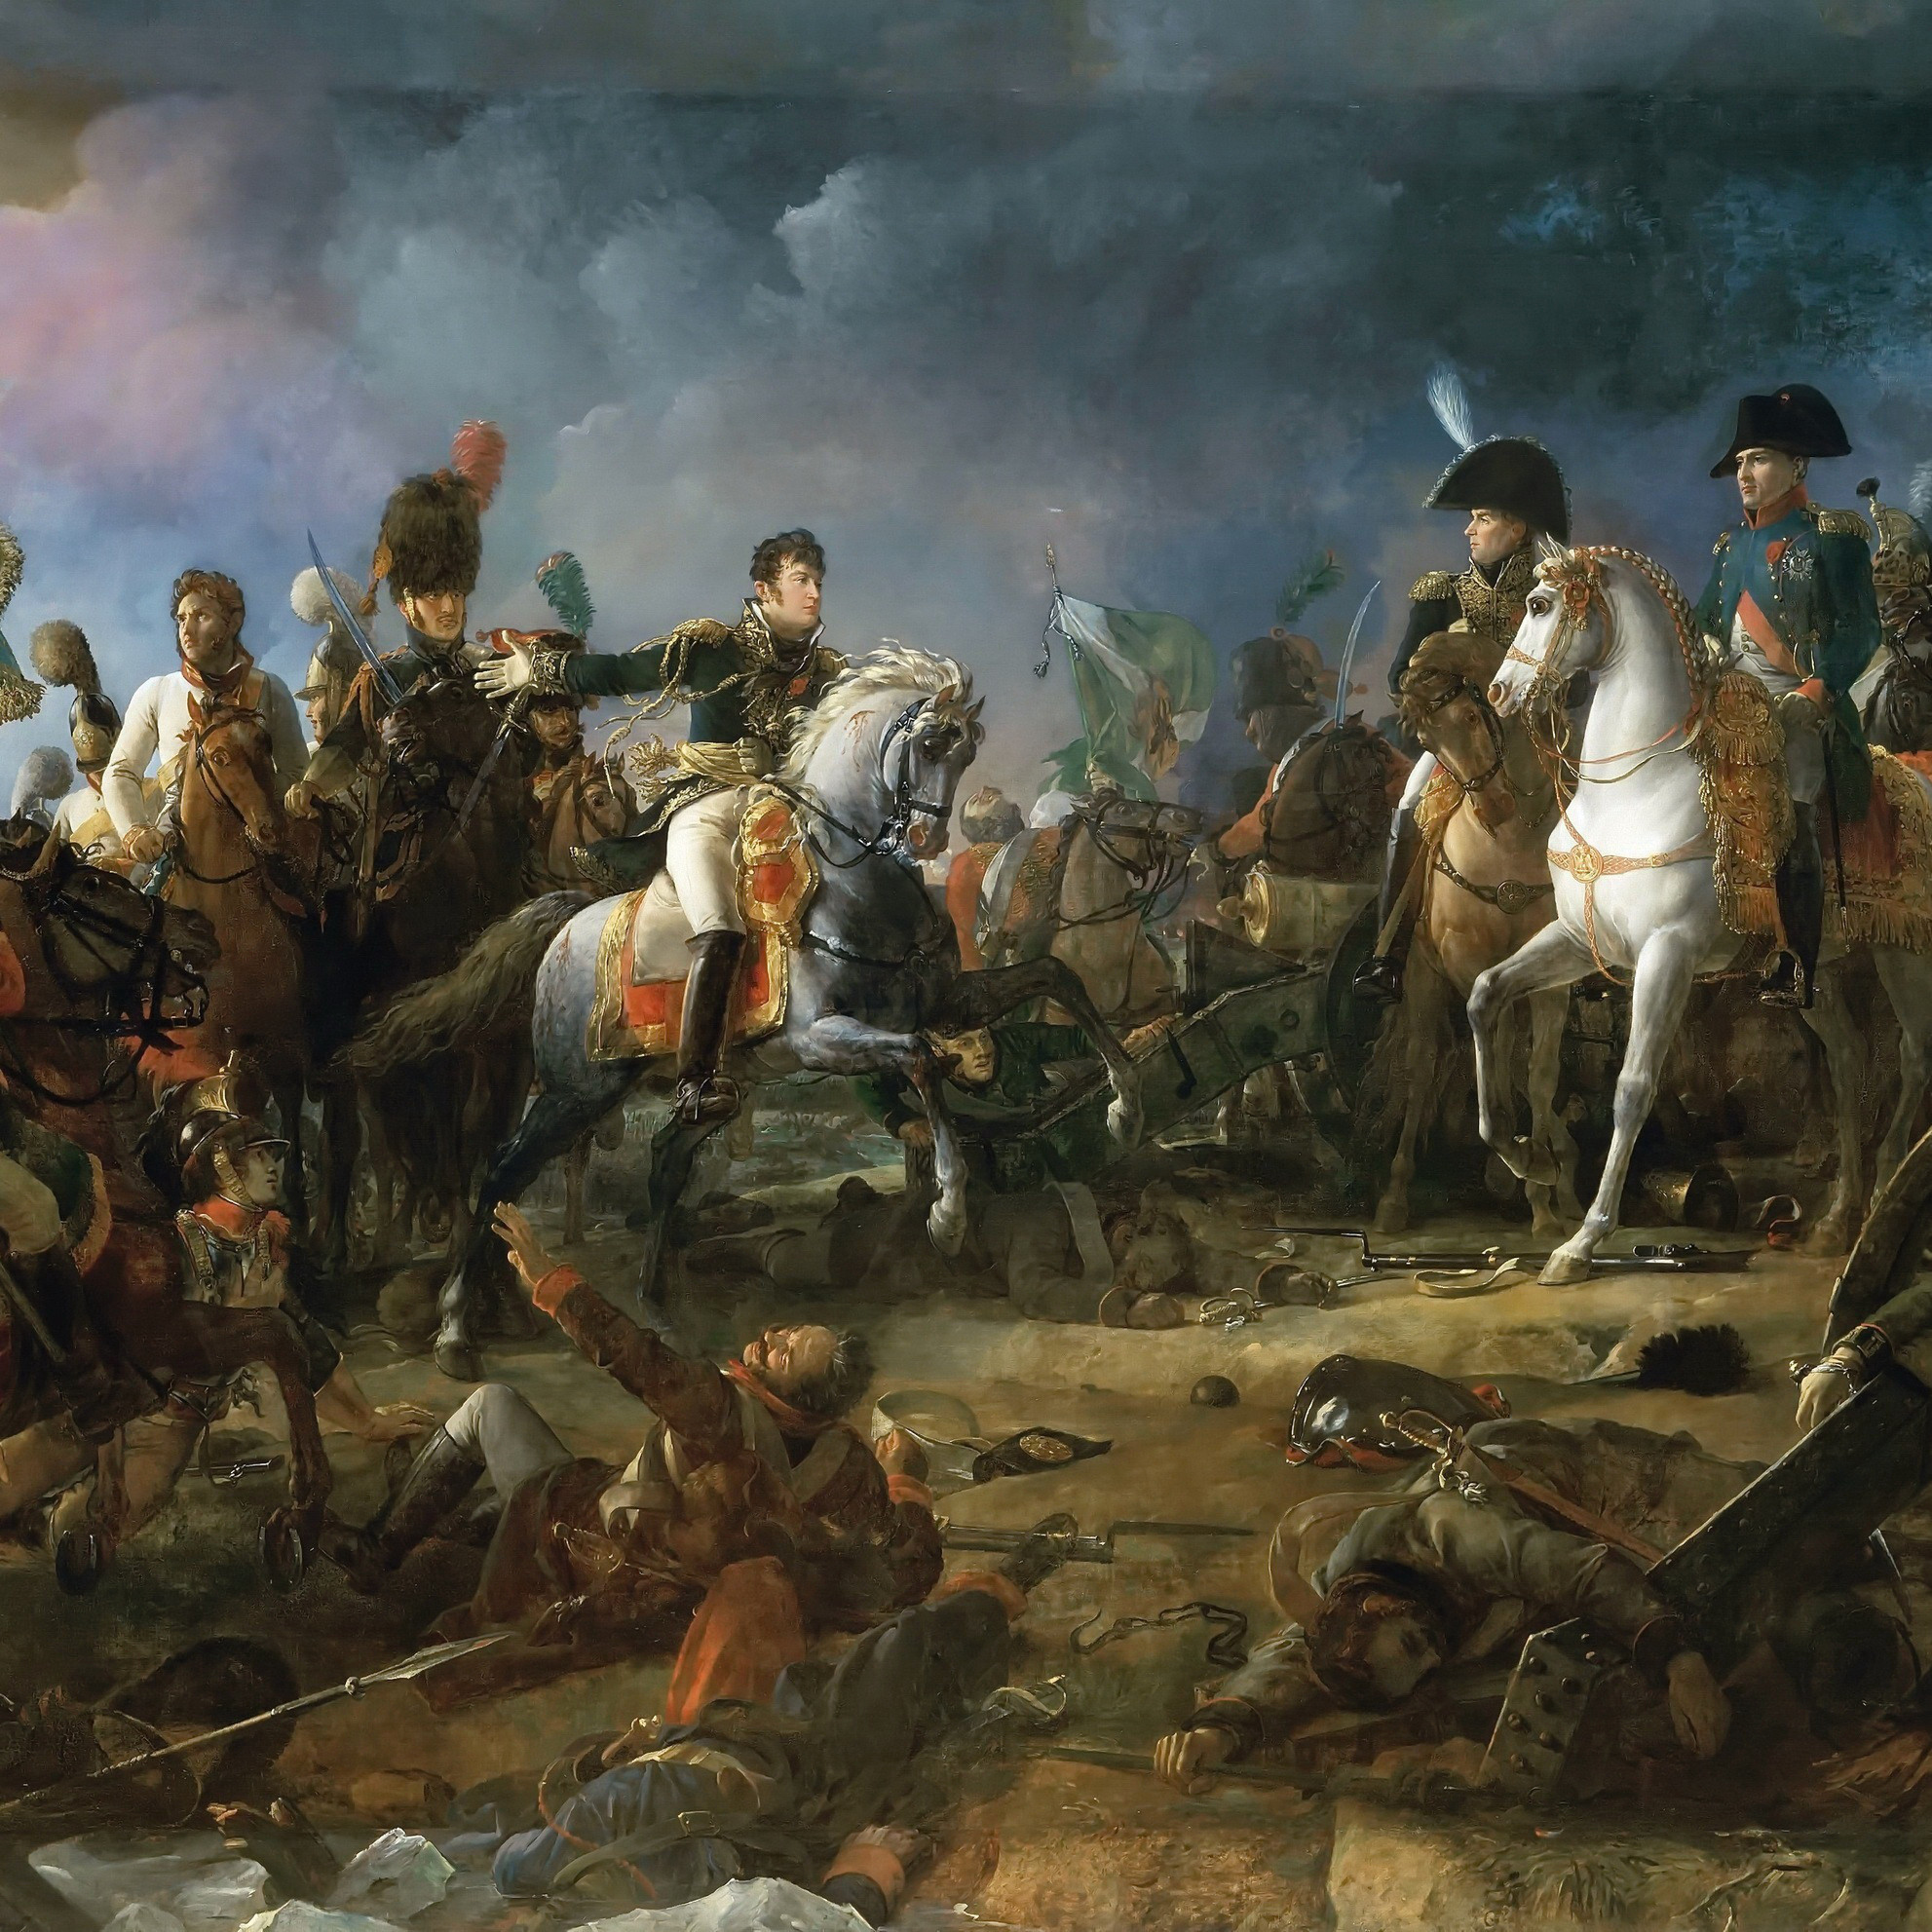 François Gérard, The battle of Austerlitz on December 2nd, 1815. Oil on canvas preserved at the Musée de Trianon.